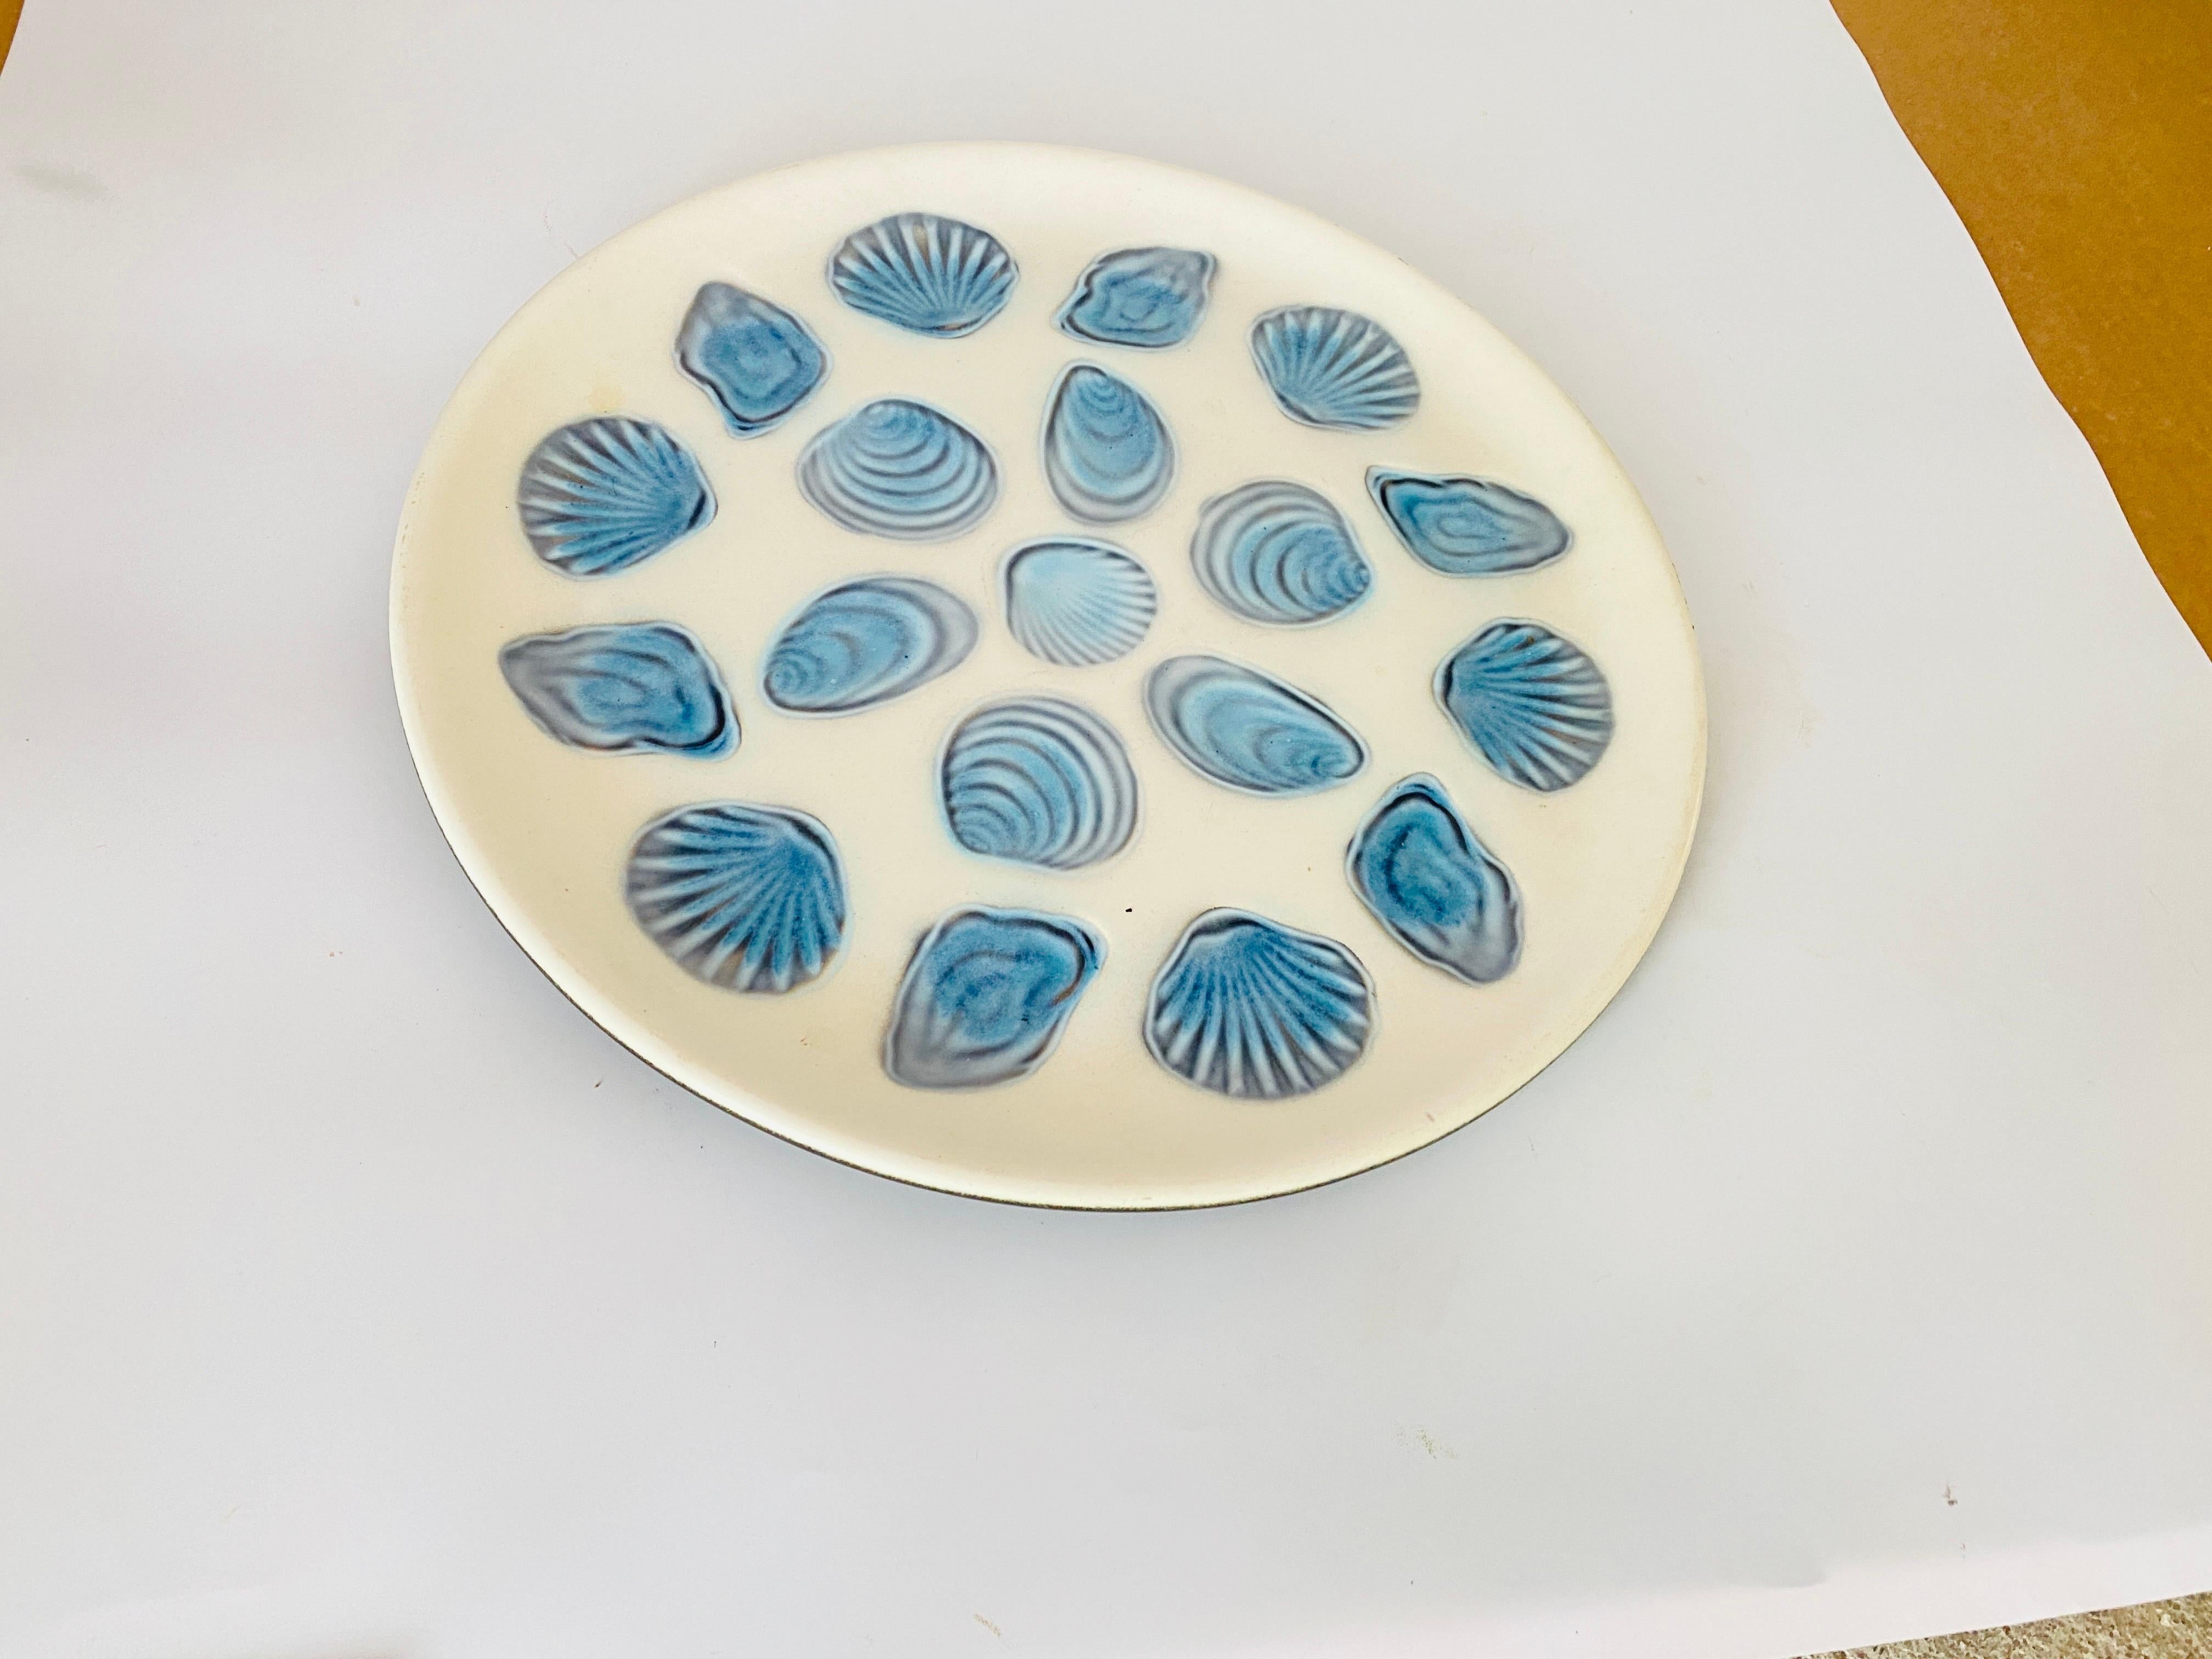 Large Oyster Plate in Ceramic Blue and White Color, 1960 France by Elchinger For Sale 1